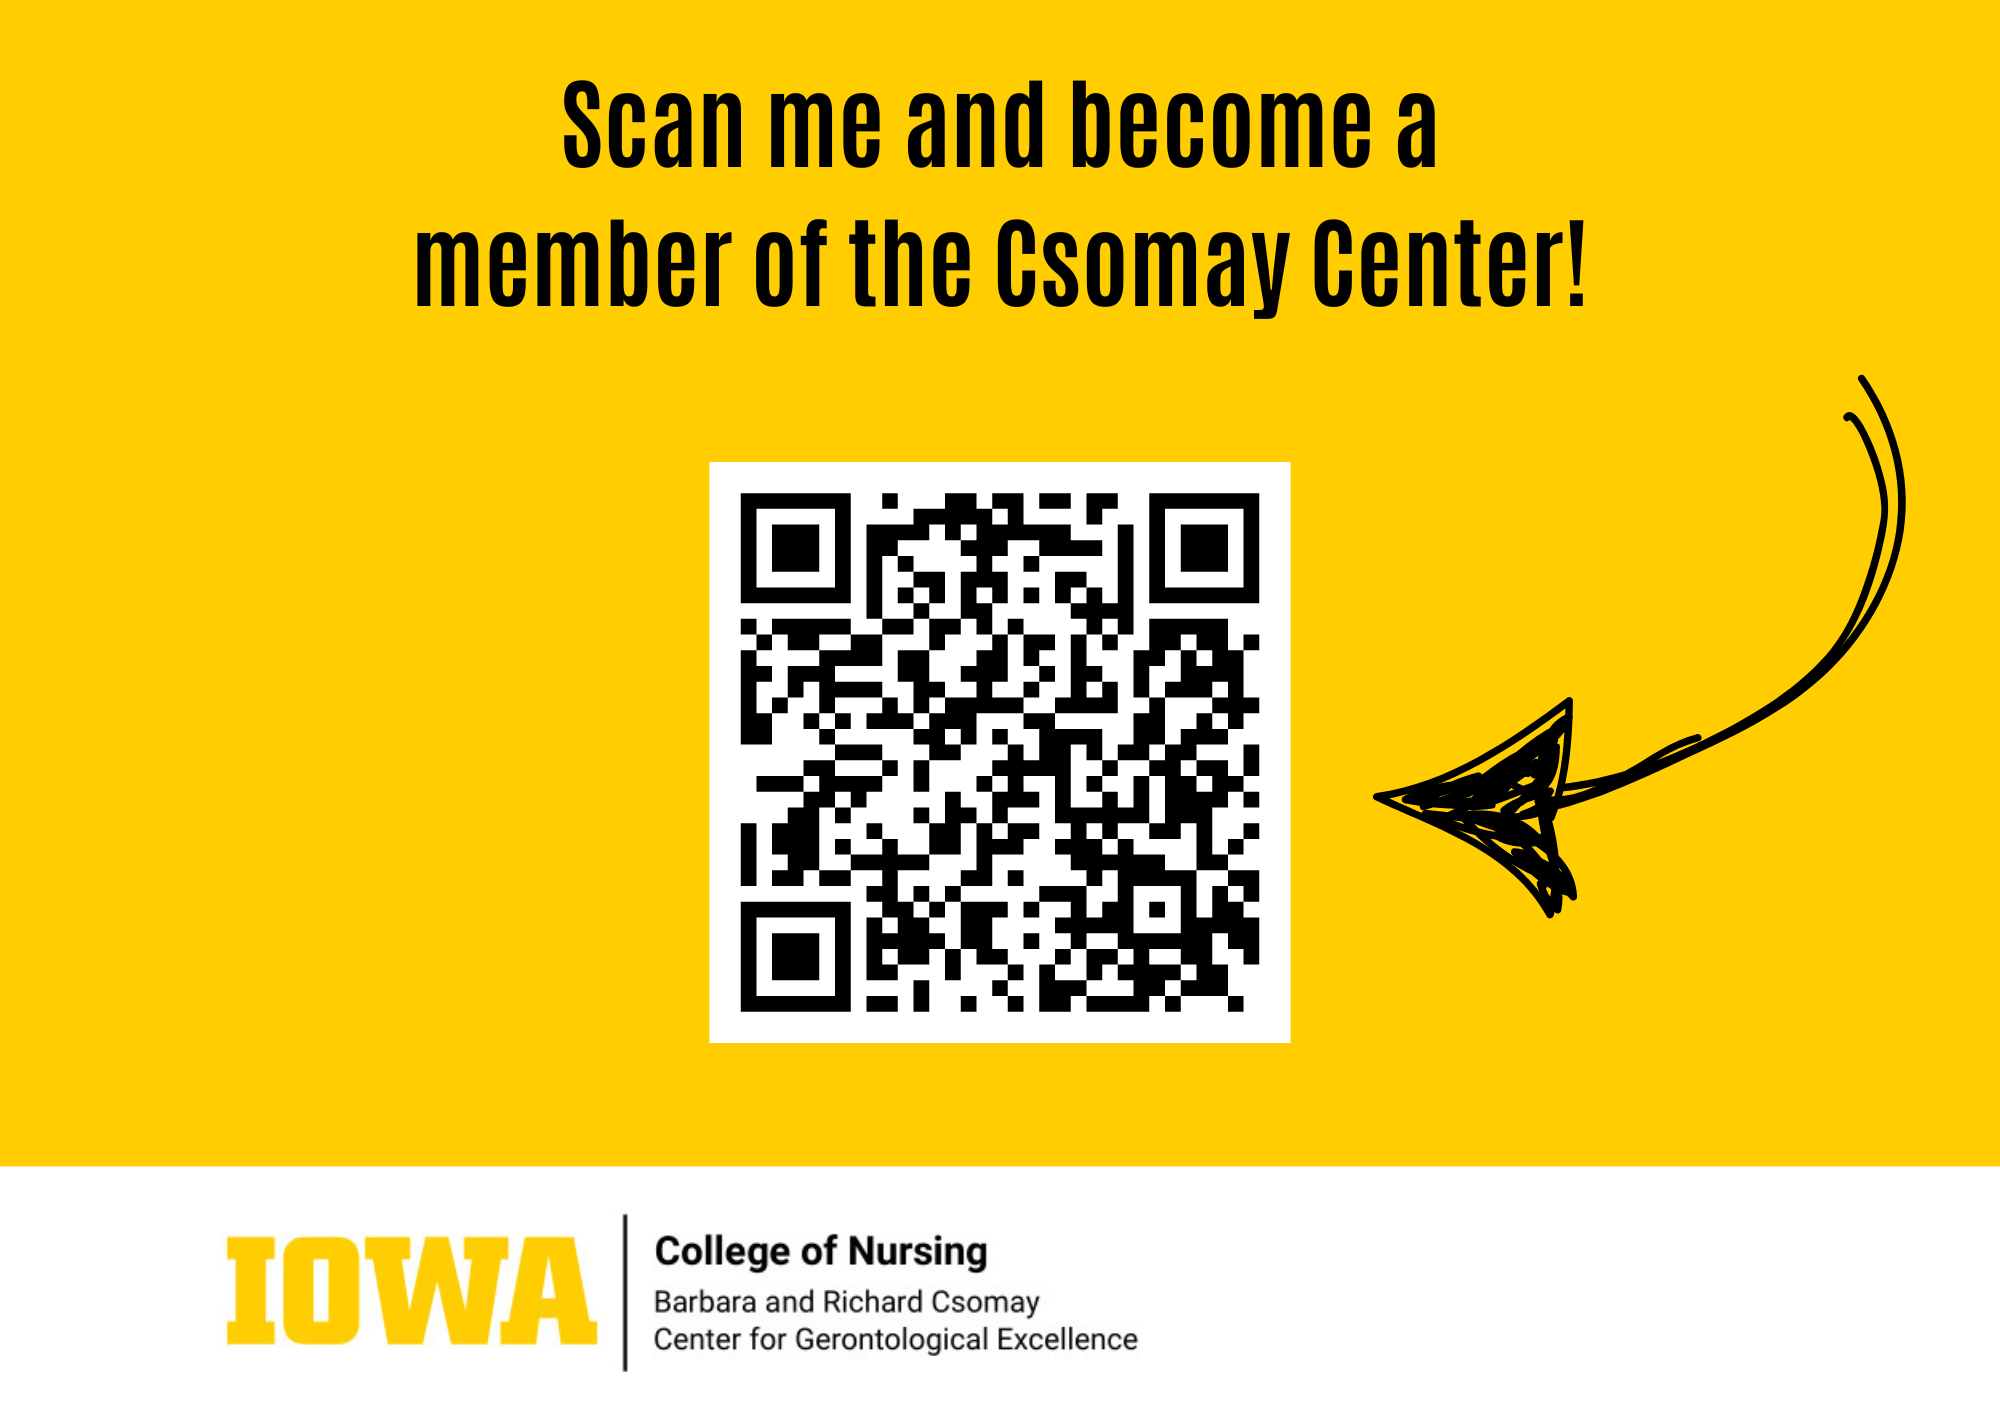 "Scan me and become a member of the Csomay Center" gold slide with a QR code.